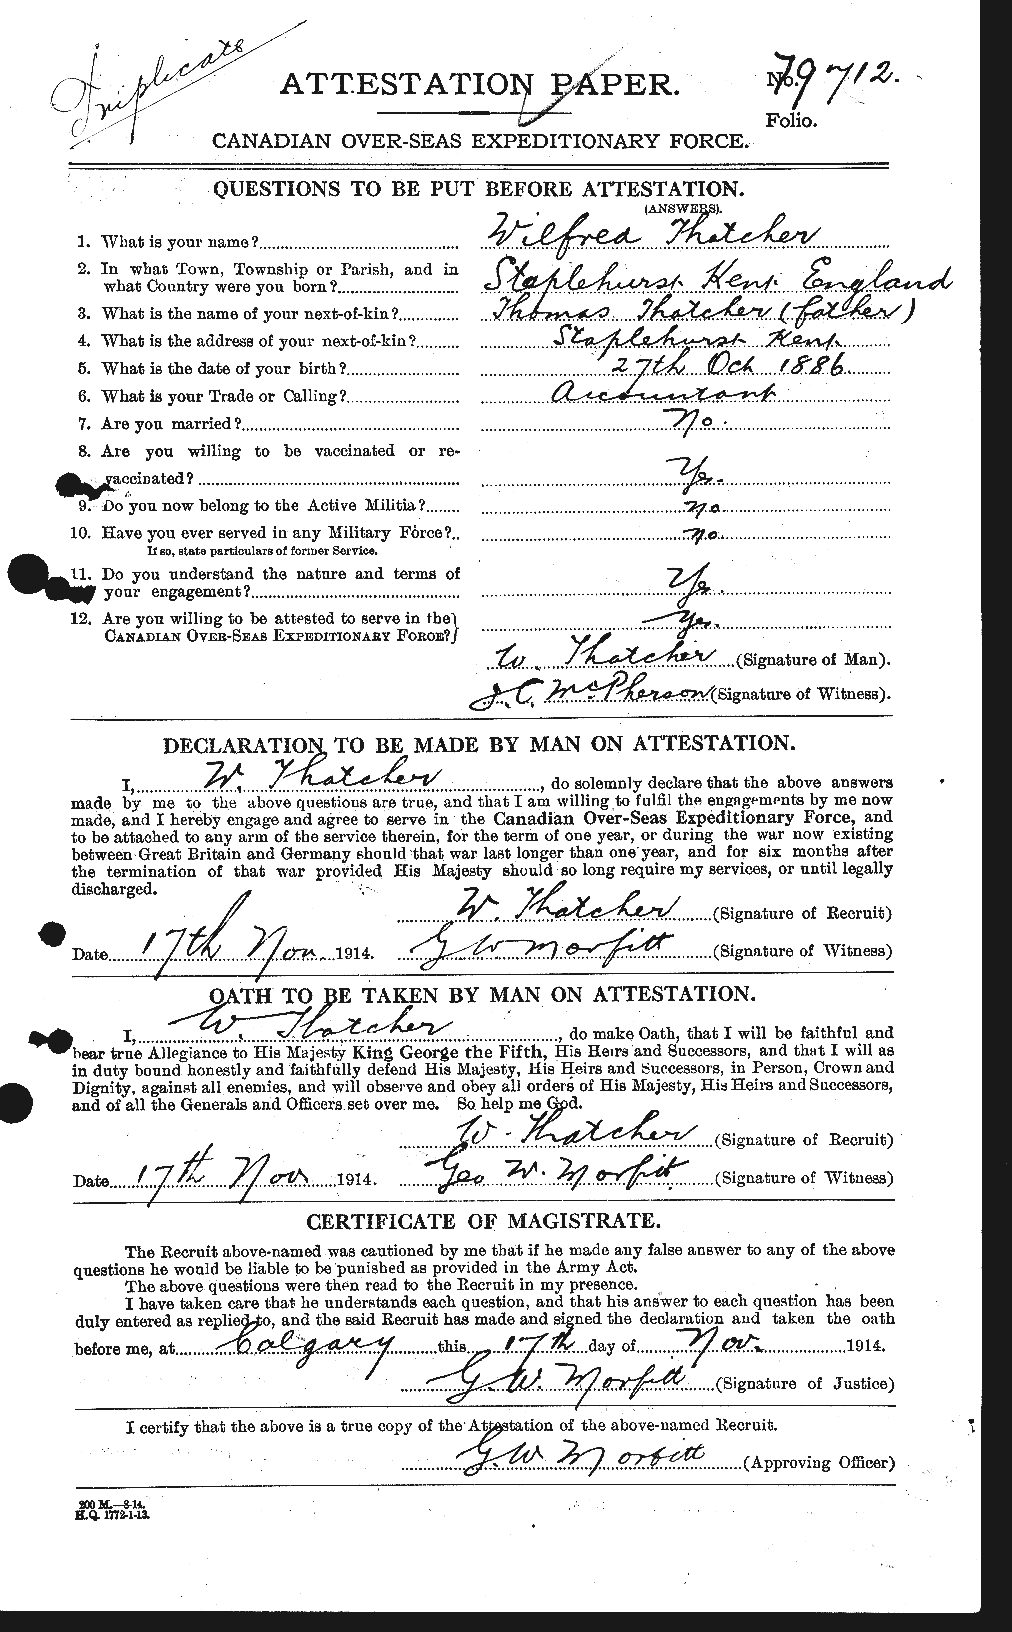 Personnel Records of the First World War - CEF 629514a